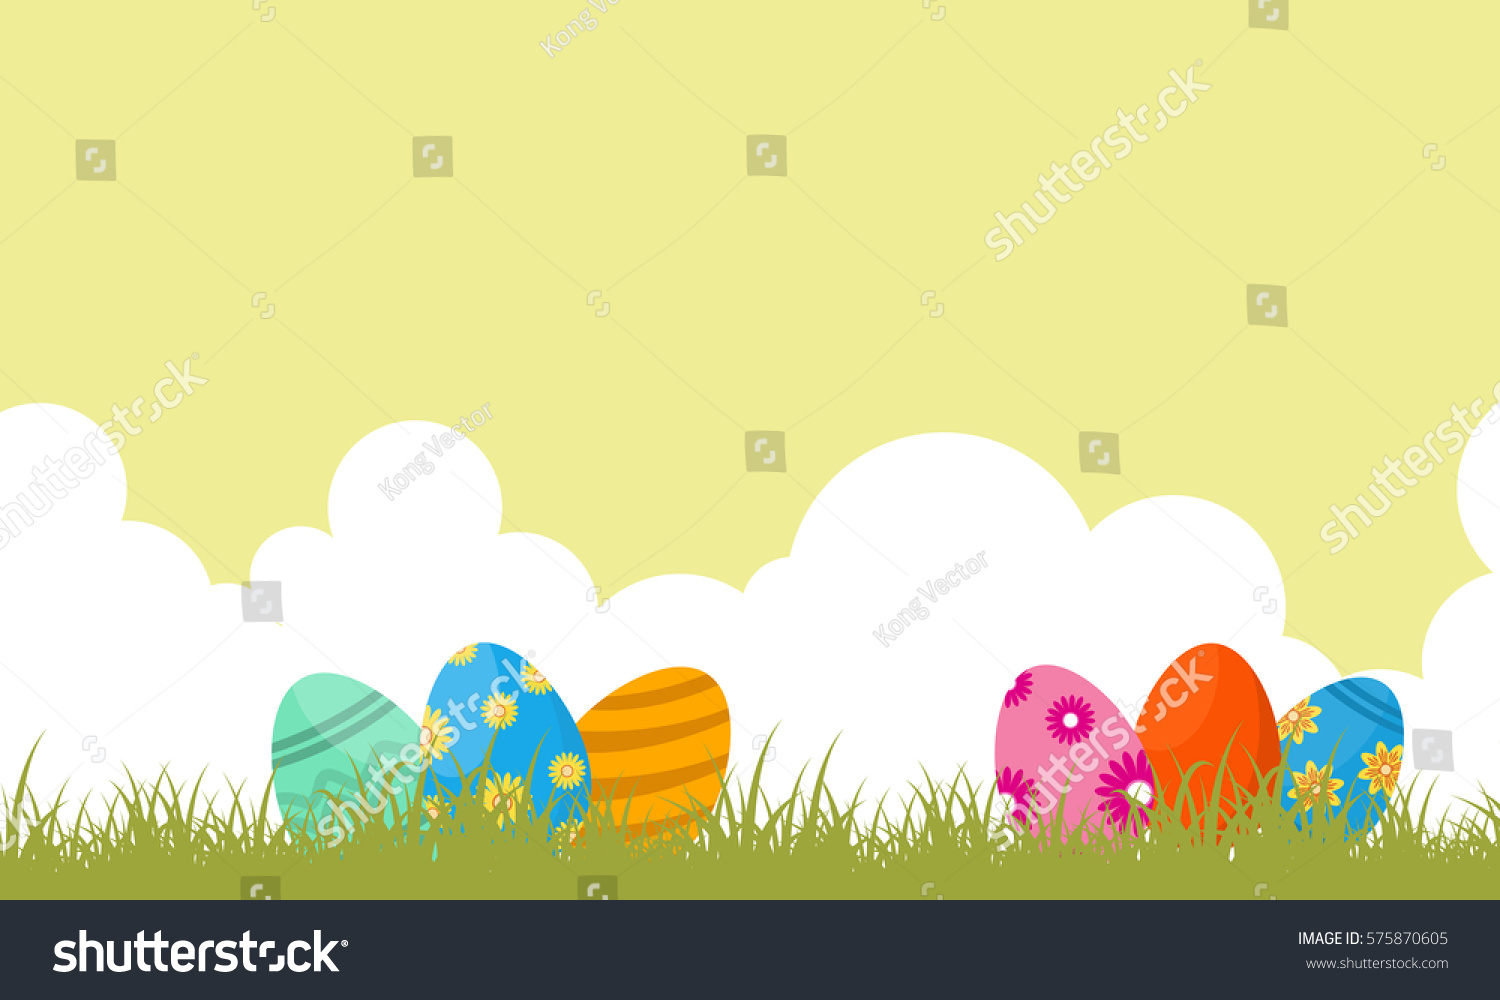 Scenery of easter egg landscape - Royalty Free Stock Vector 575870605 ...